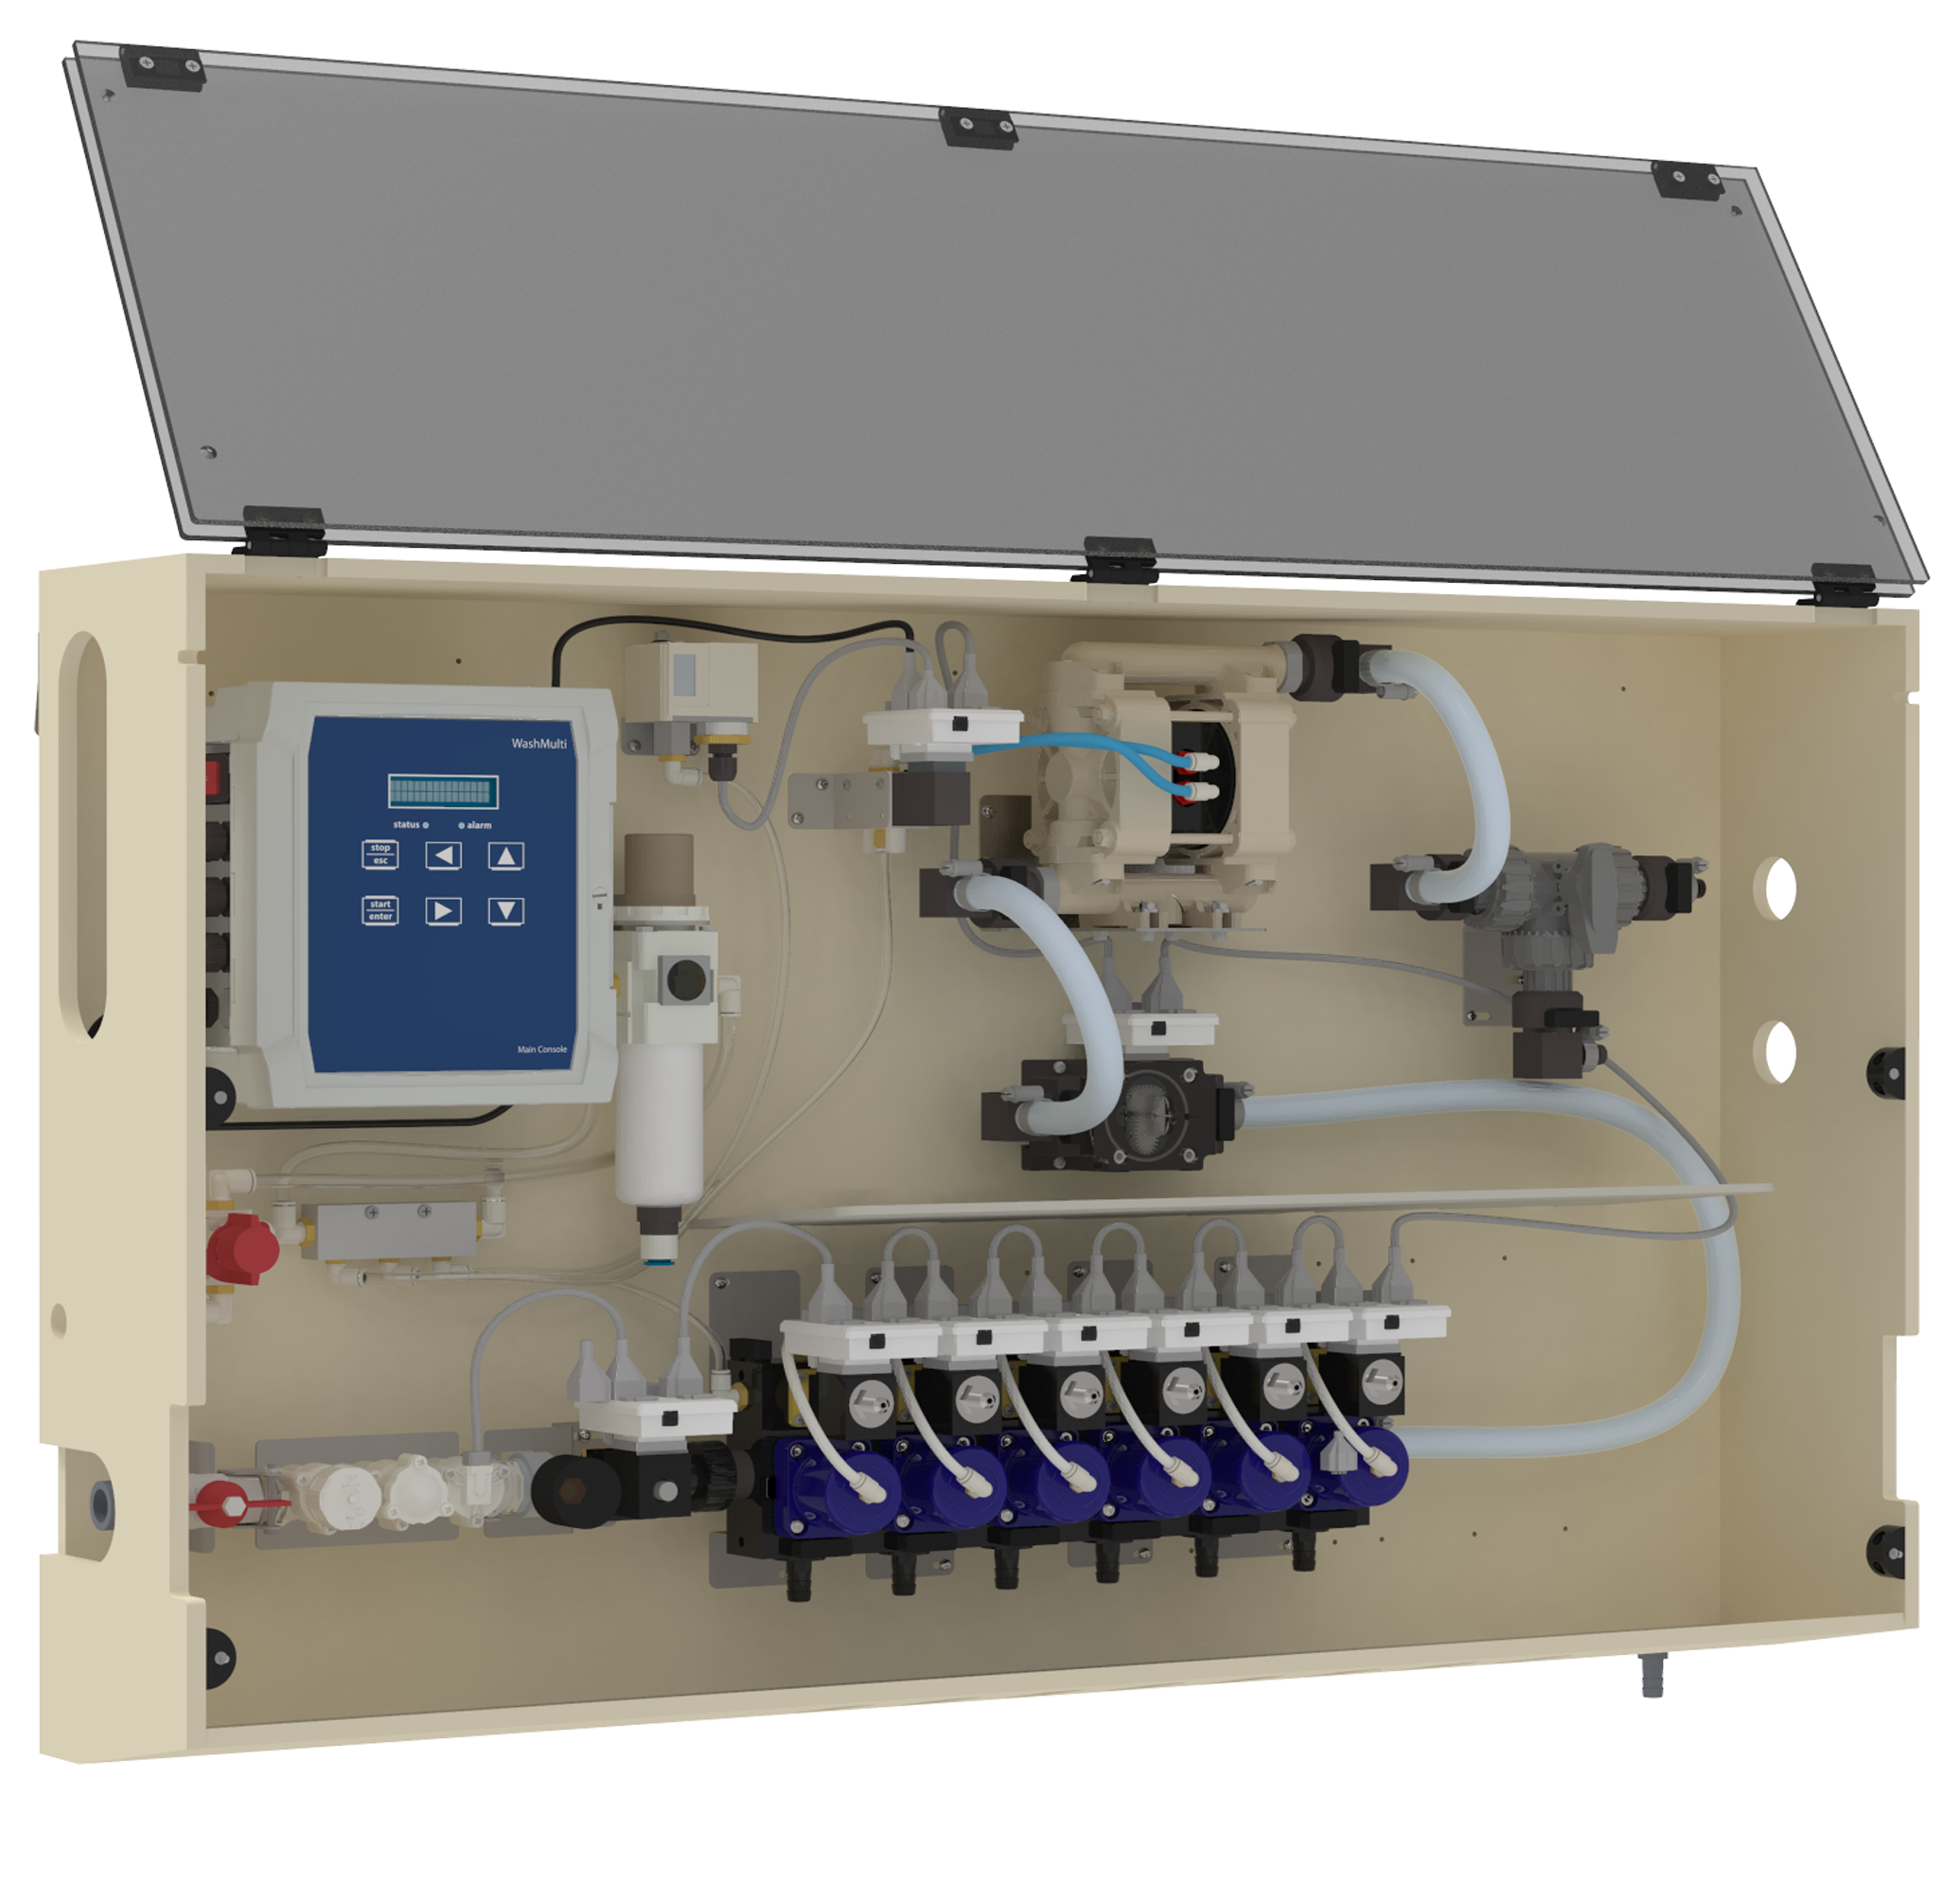 The pneumatic dosing system features a built-in web server and dedicated SekoWeb portal to provide live and historical data.